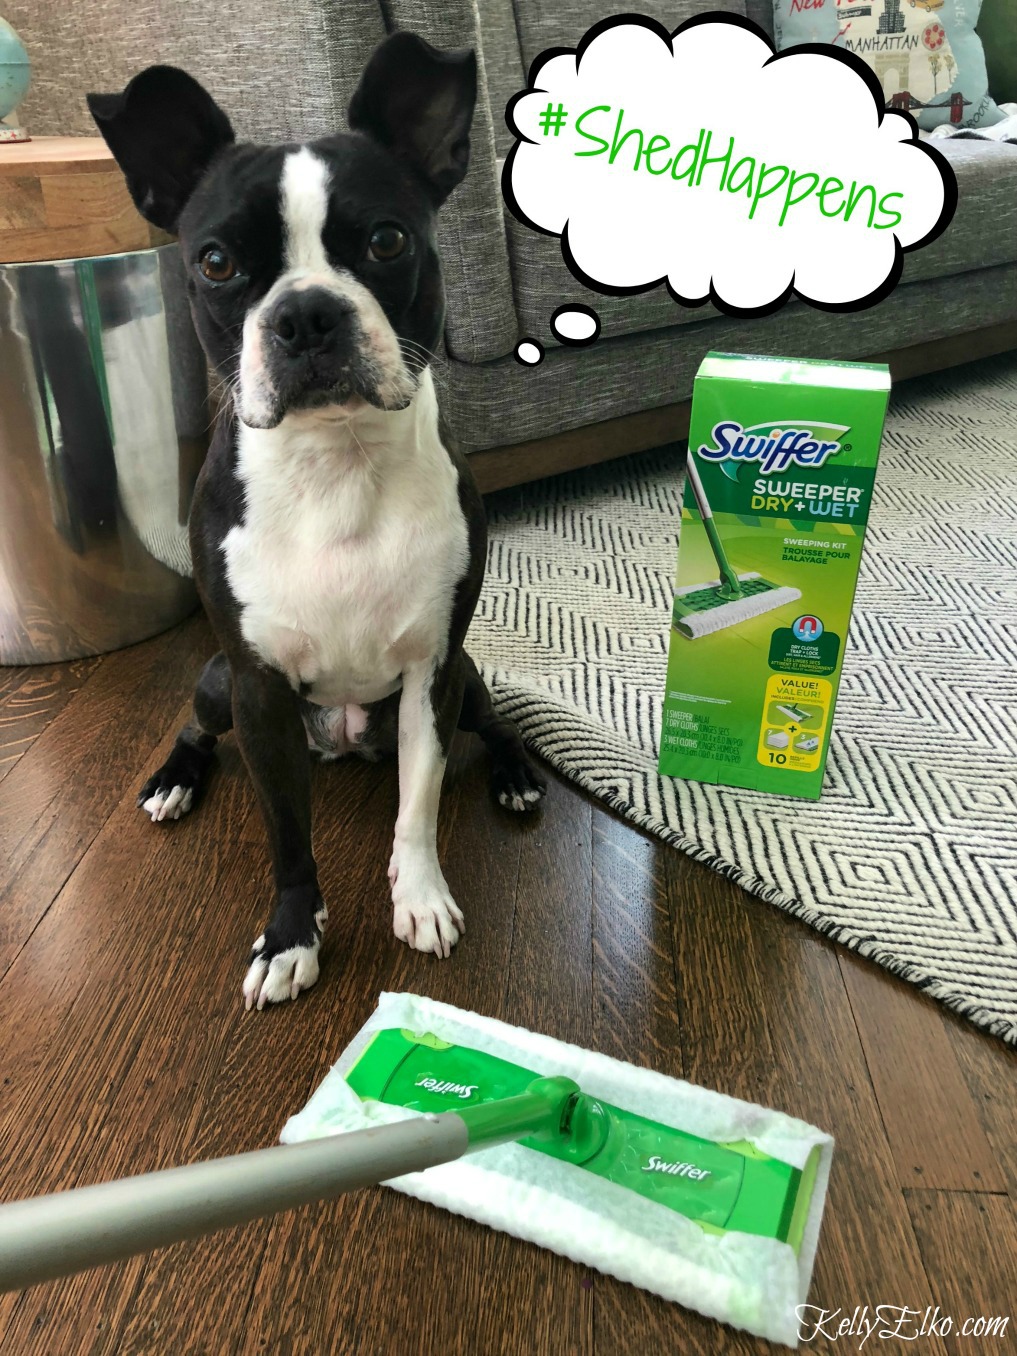 How to have a clean house with pets kellyelko.com #cleaning #cleanhouse #swiffer #shedhappens #cleaningtips 